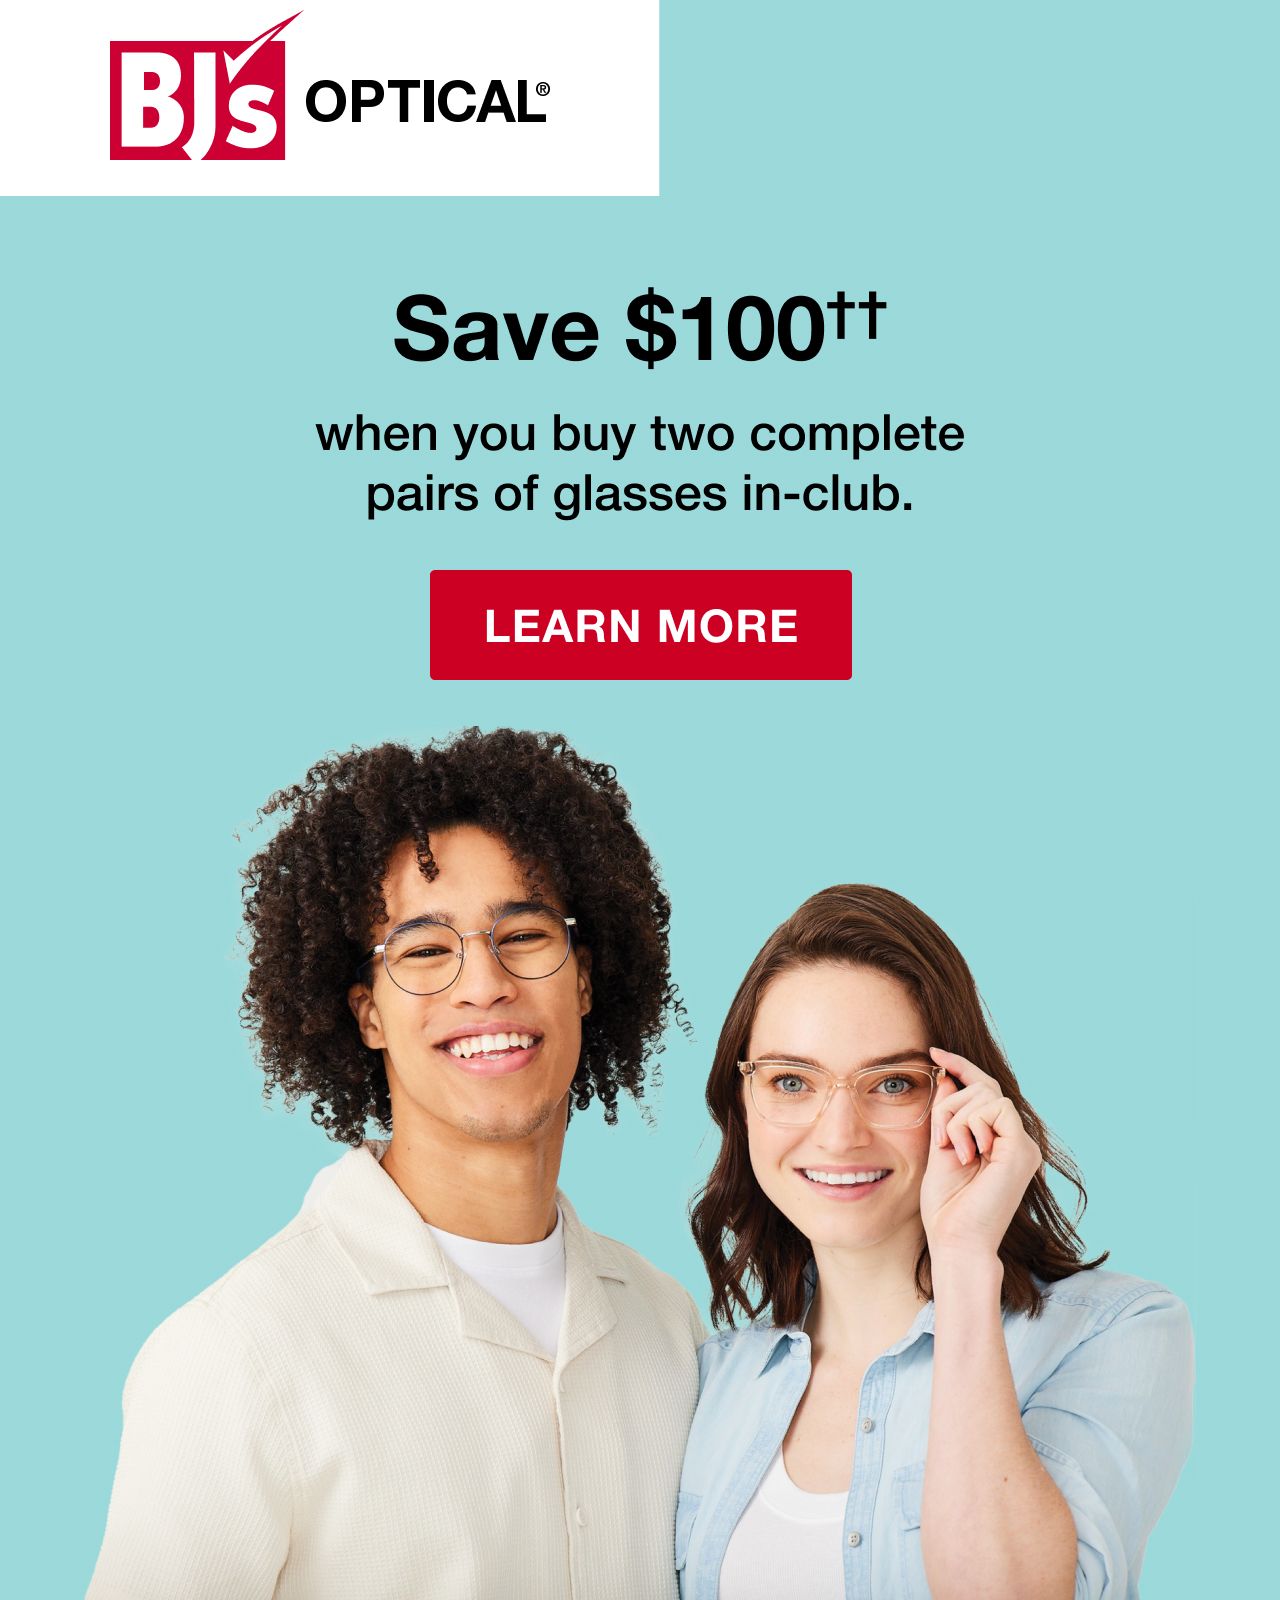 BJ's Optical. Save $100†† when you buy two complete pairs of glasses in-club. Click to learn more